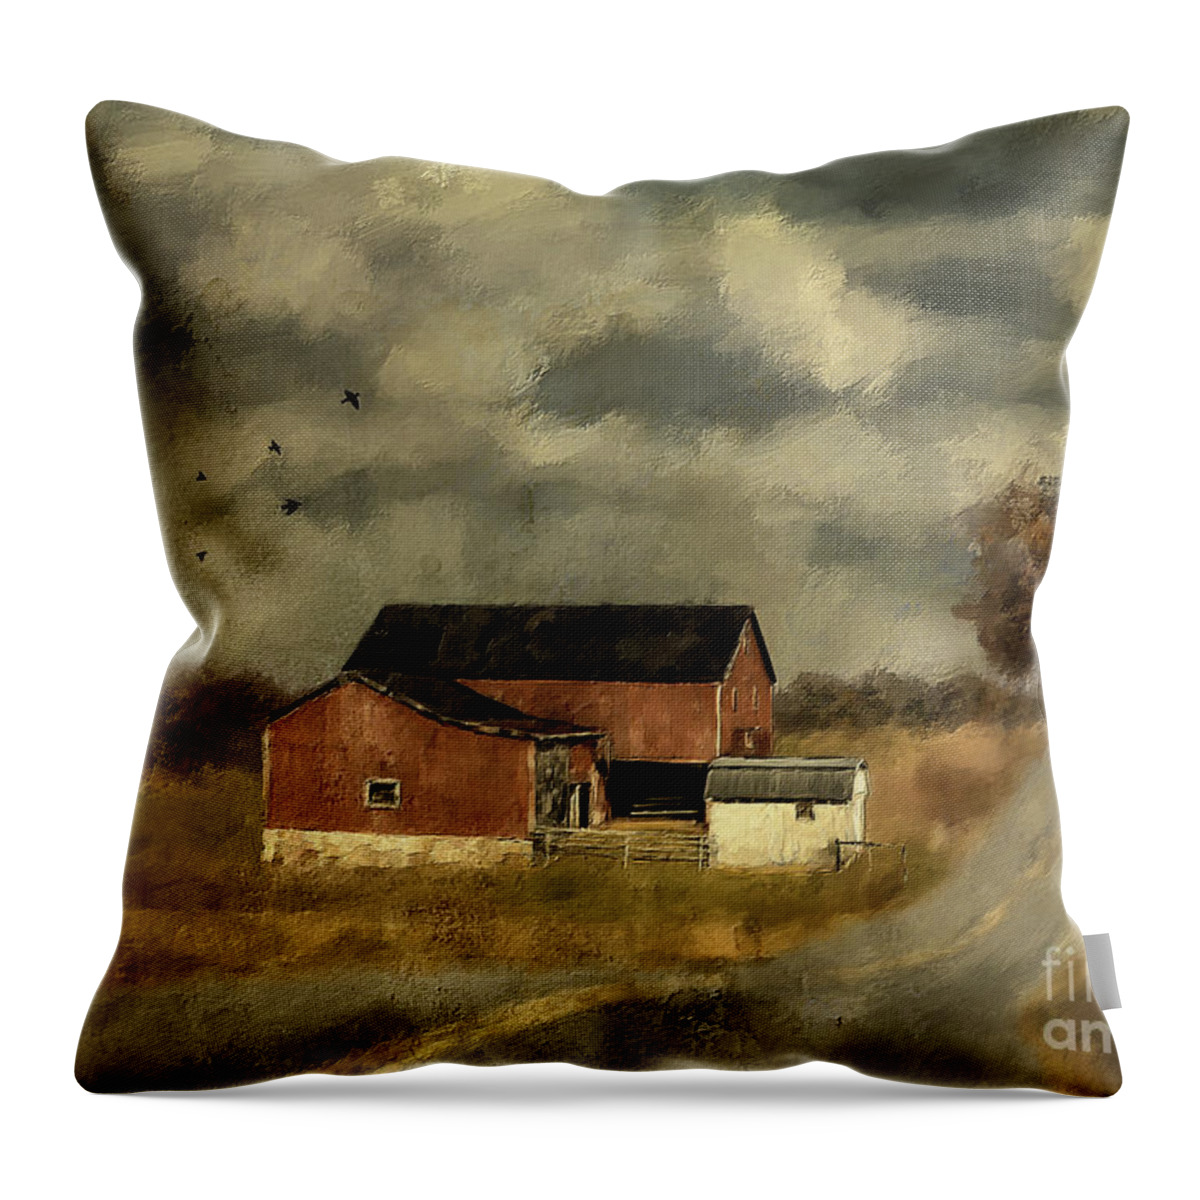 Farm Throw Pillow featuring the digital art The Coming On Of Winter by Lois Bryan